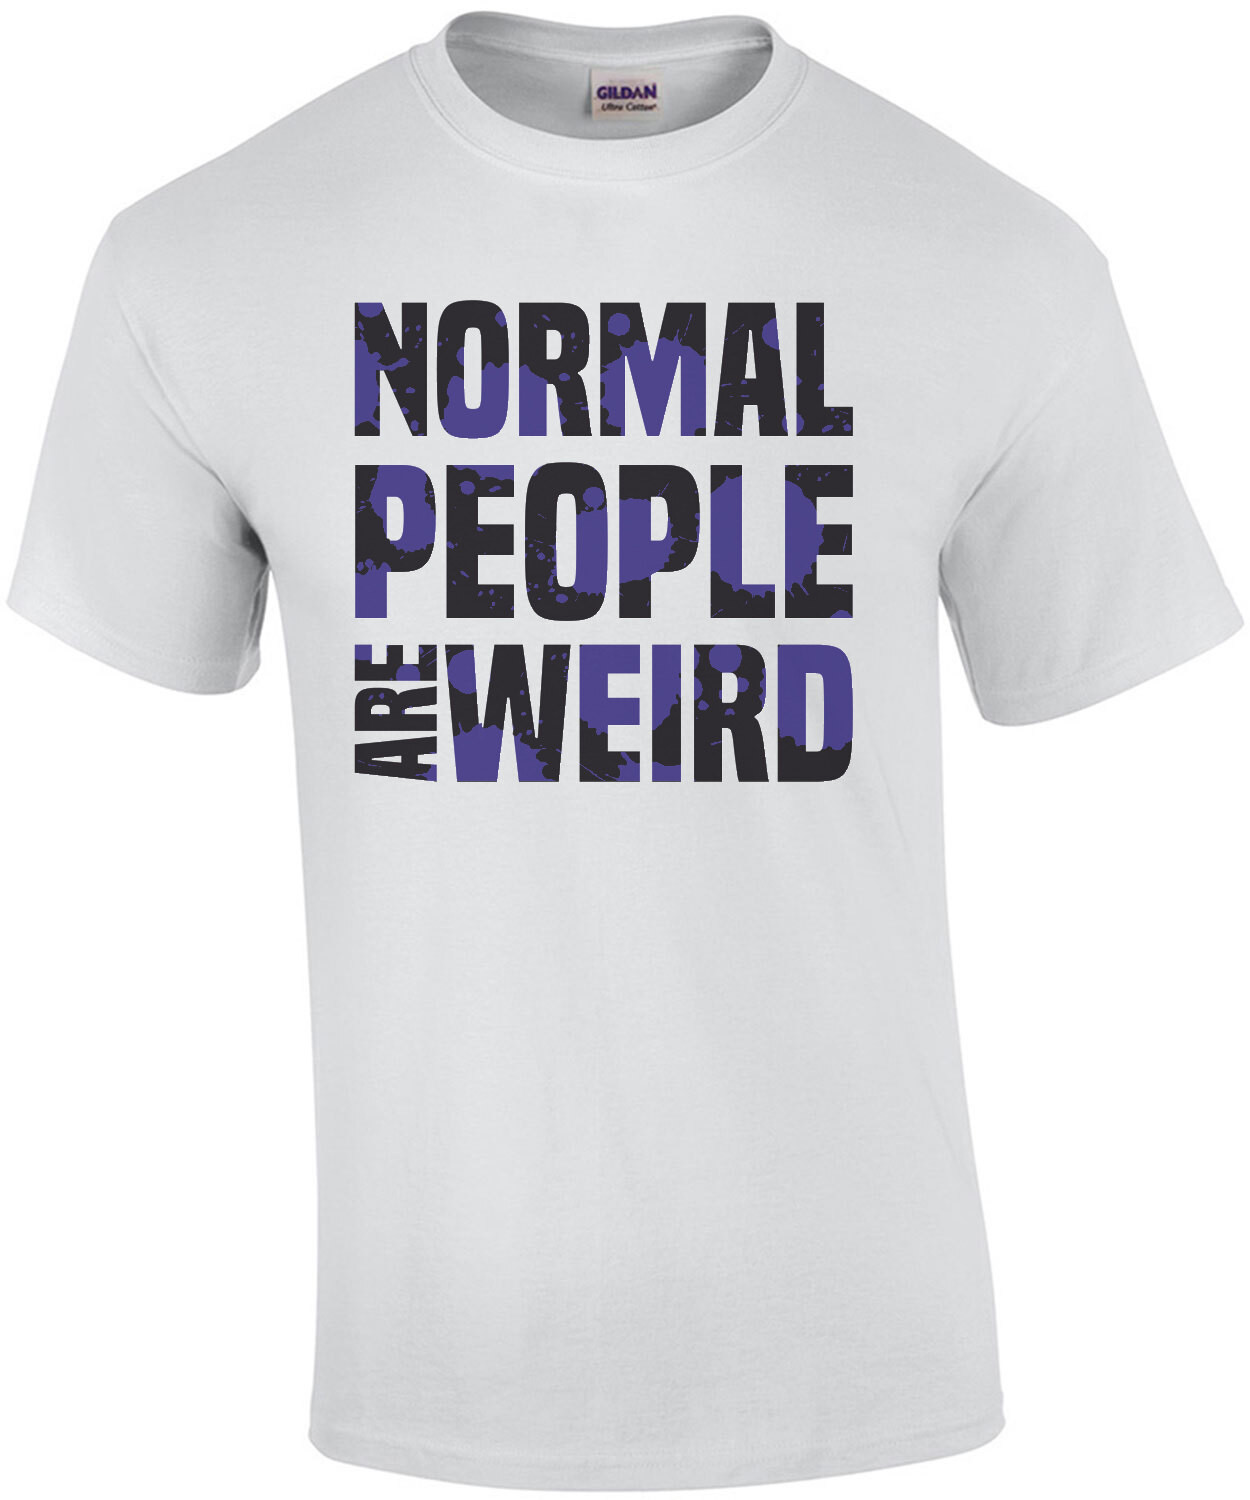 Normal people are weird - funny t-shirt